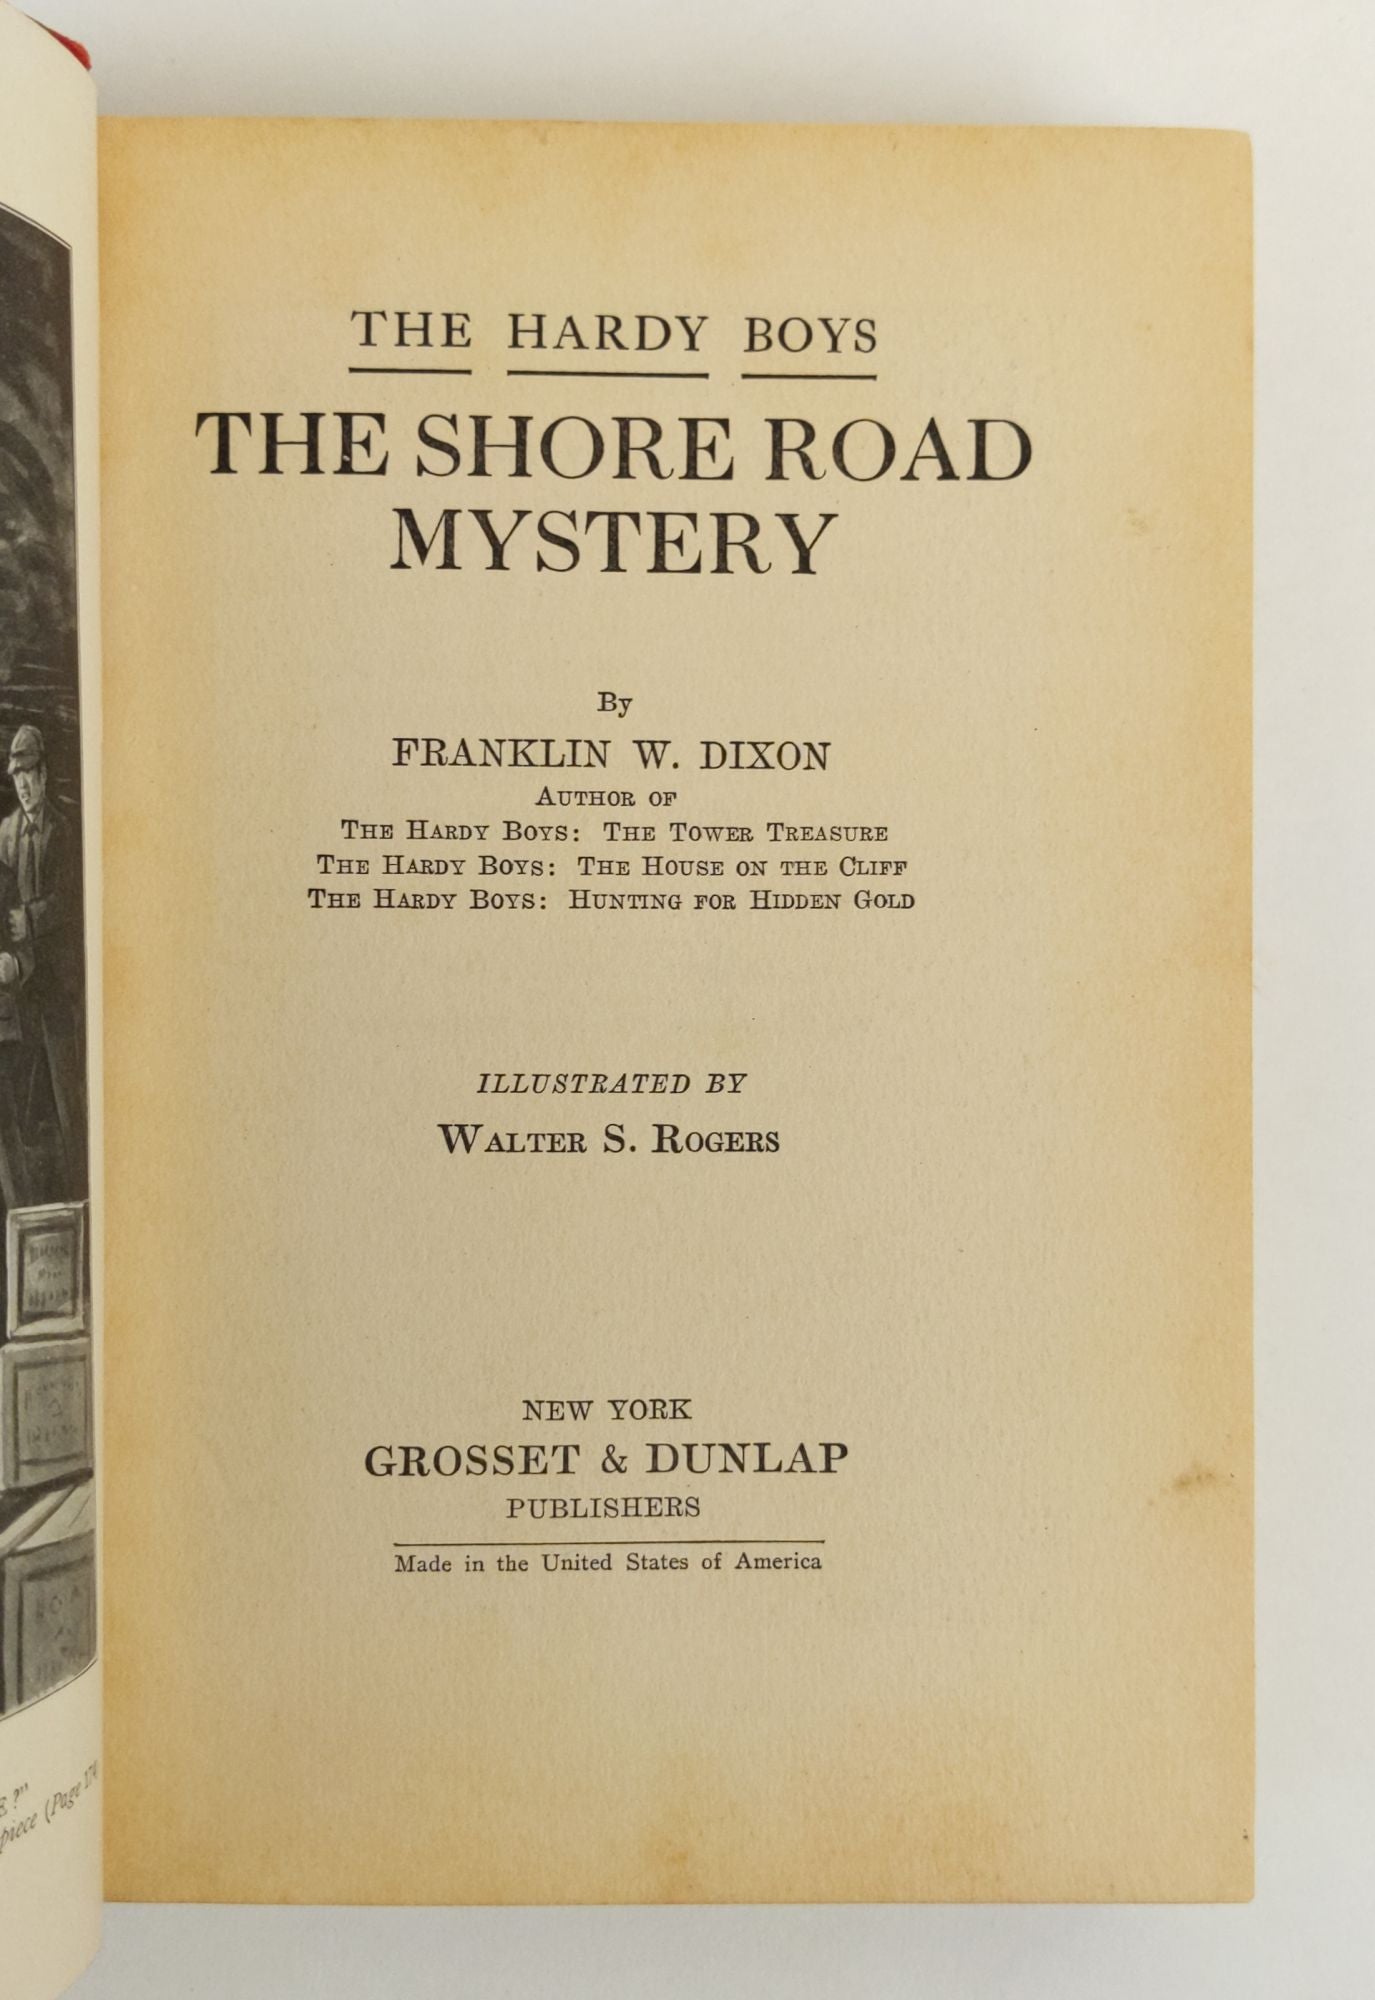 Product Image for HARDY BOYS: THE SHORE ROAD MYSTERY